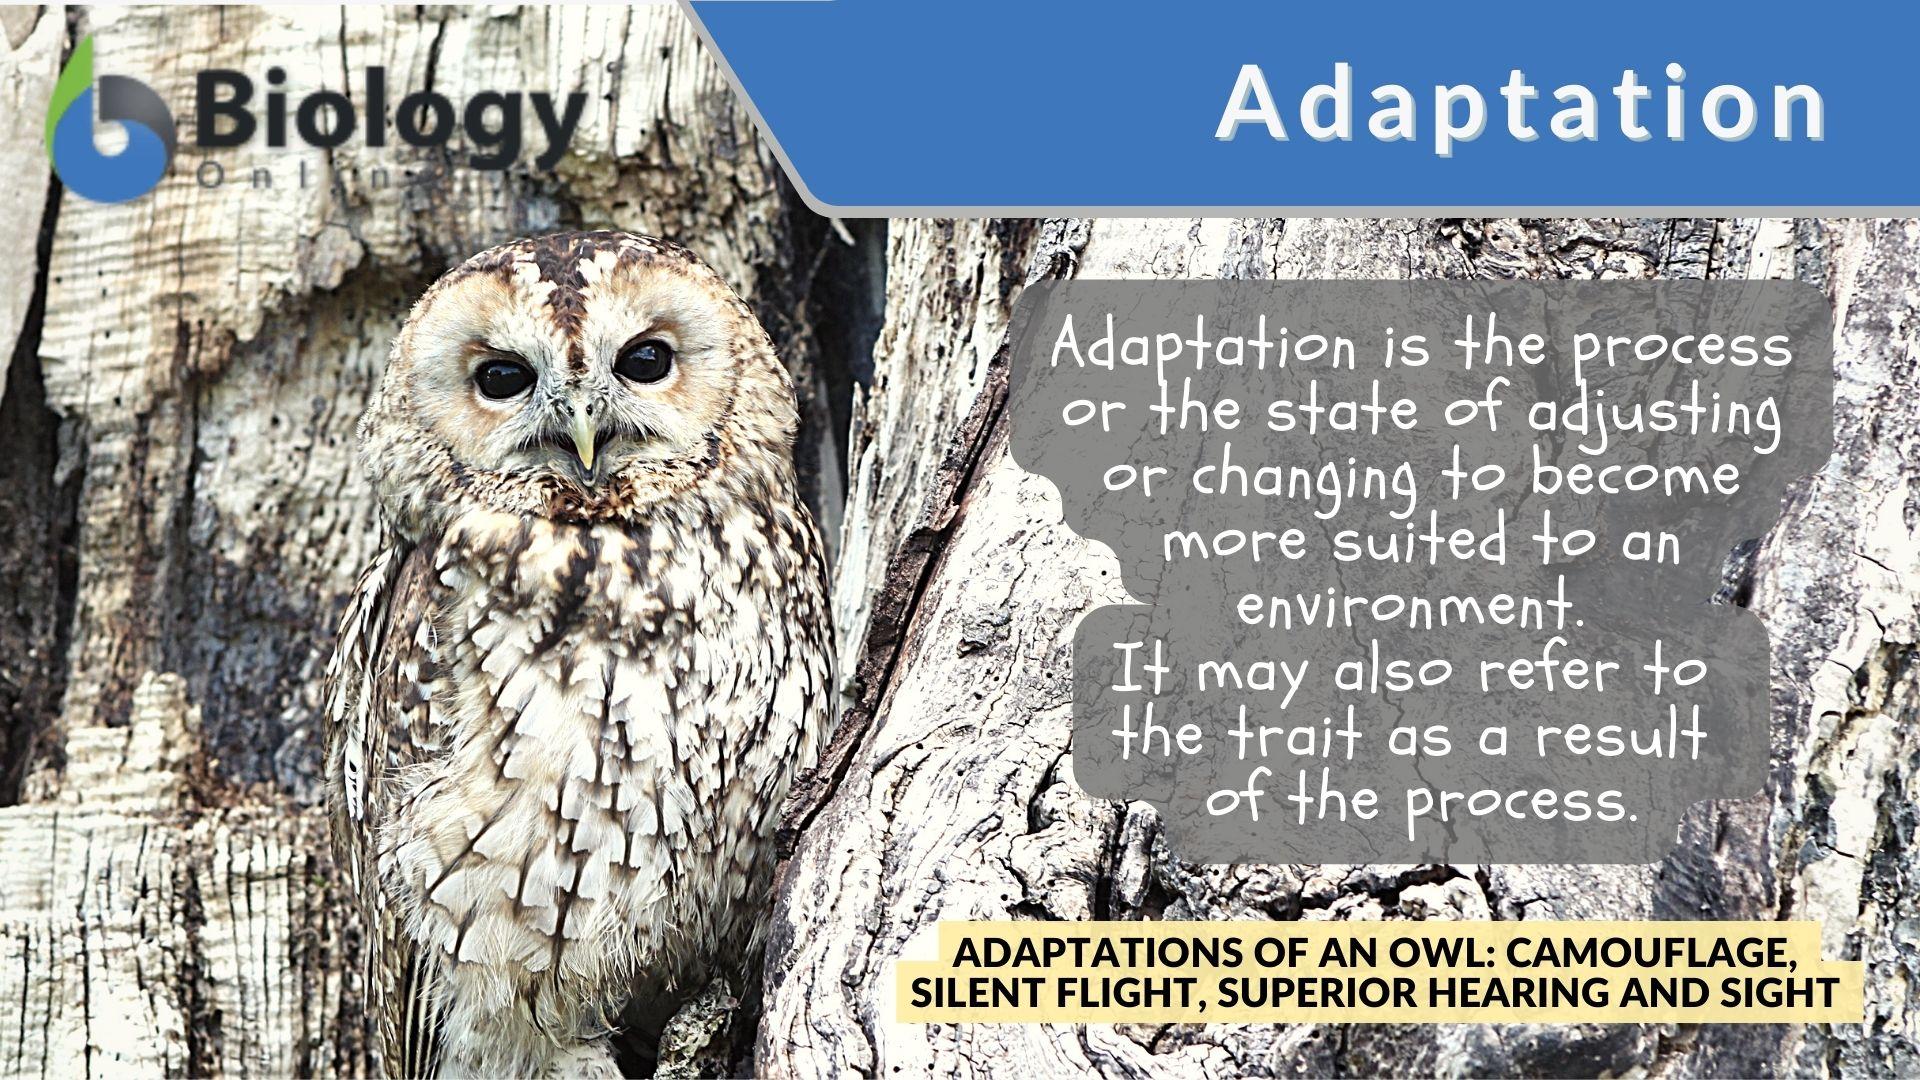 Adaptation - Definition and Examples - Biology Online Dictionary